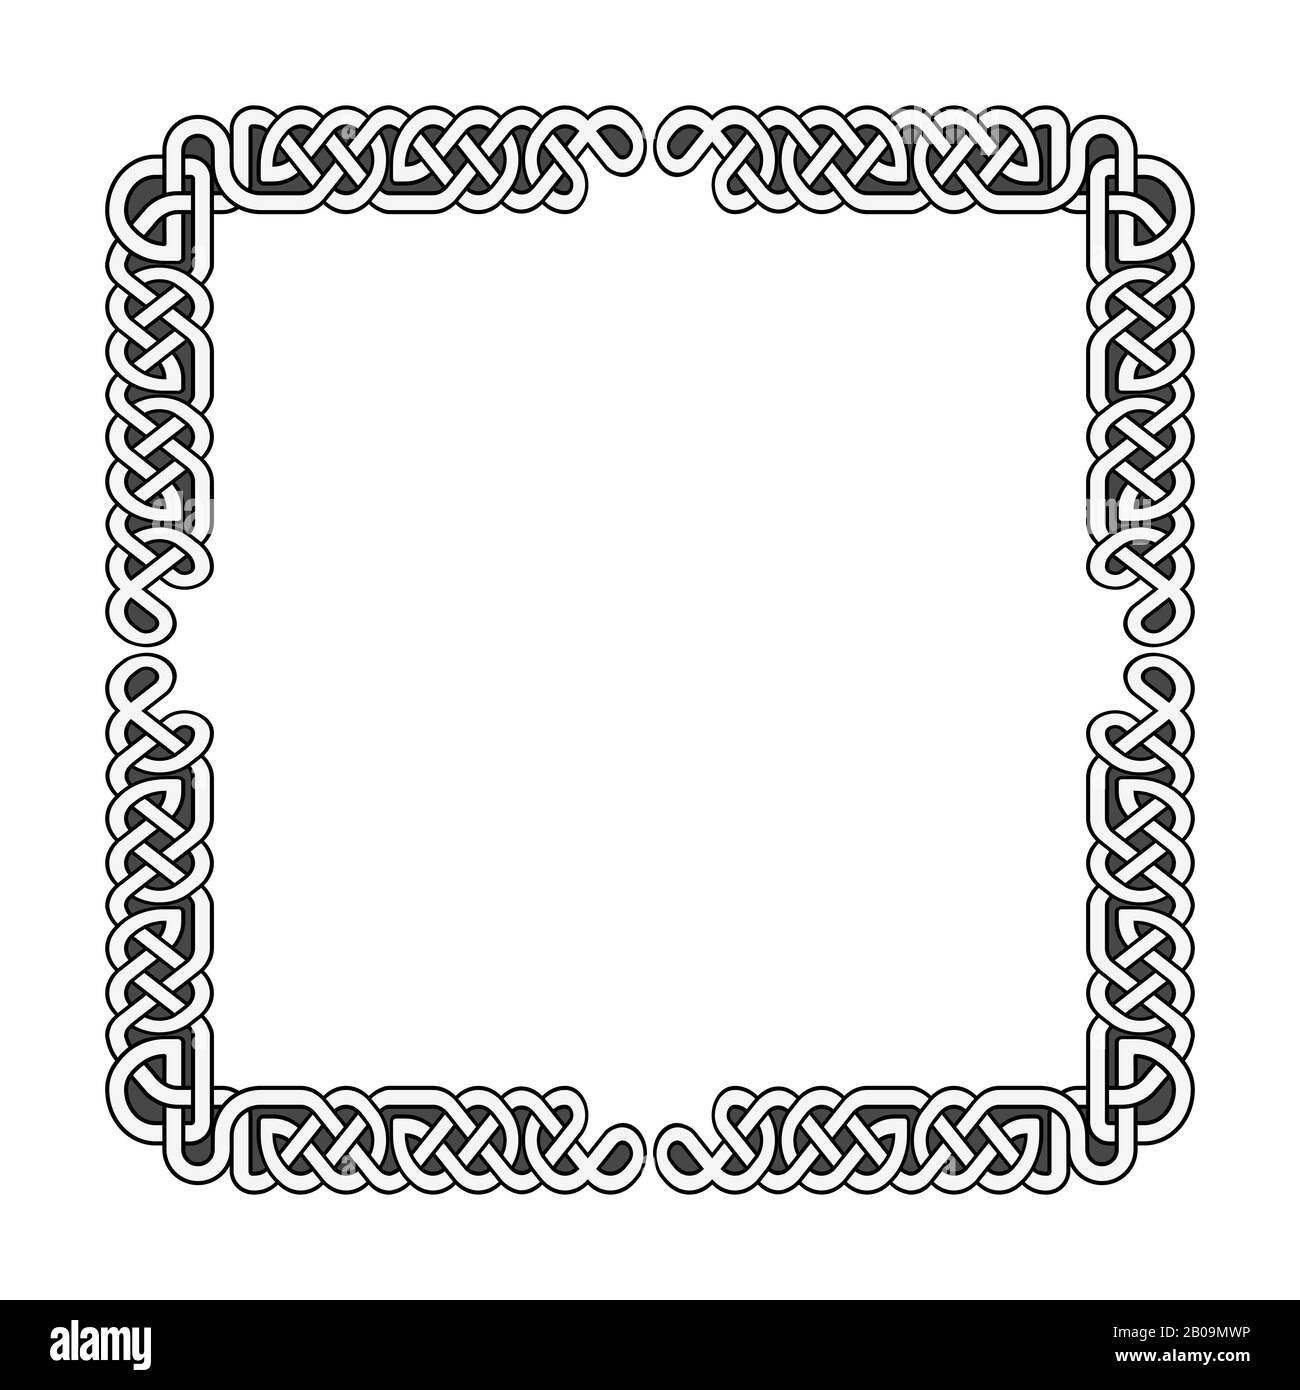 Celtic knots vector medieval frame in black and white. Ancient tribal decorative elements illustration Stock Vector